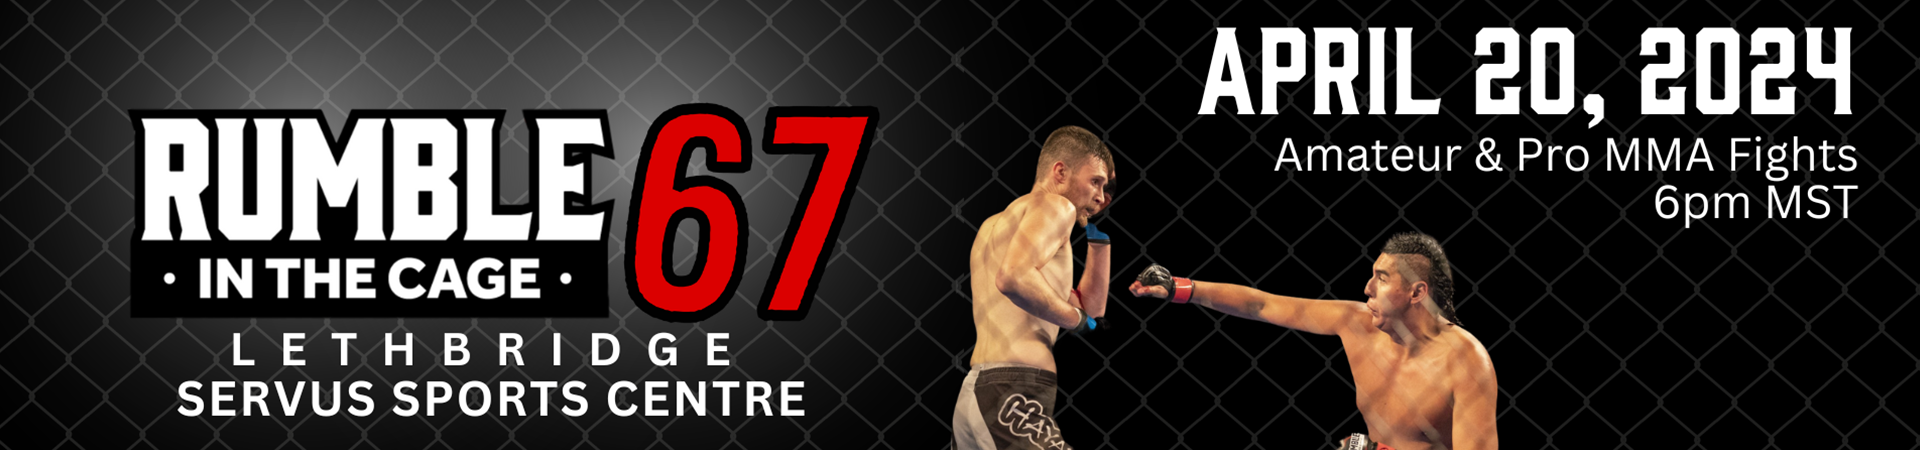 Rumble in the Cage 67